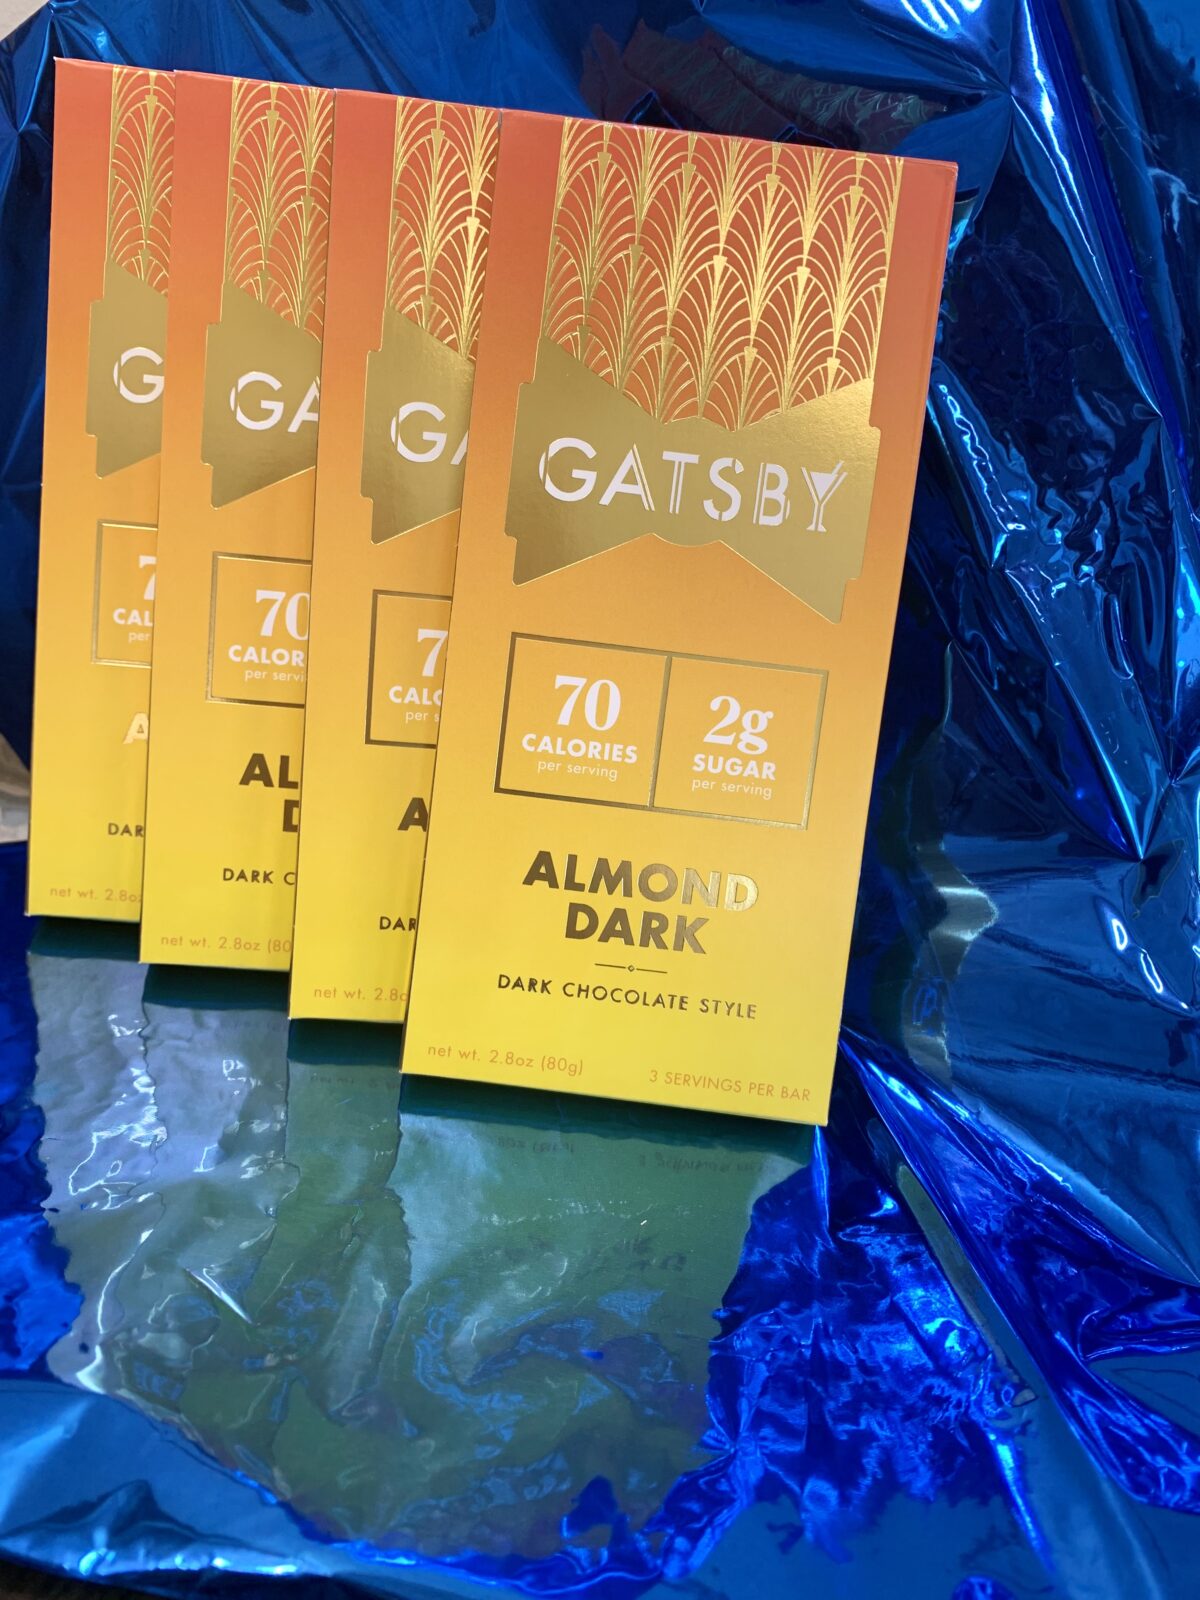 Find a Low Calorie Chocolate with Gatsby